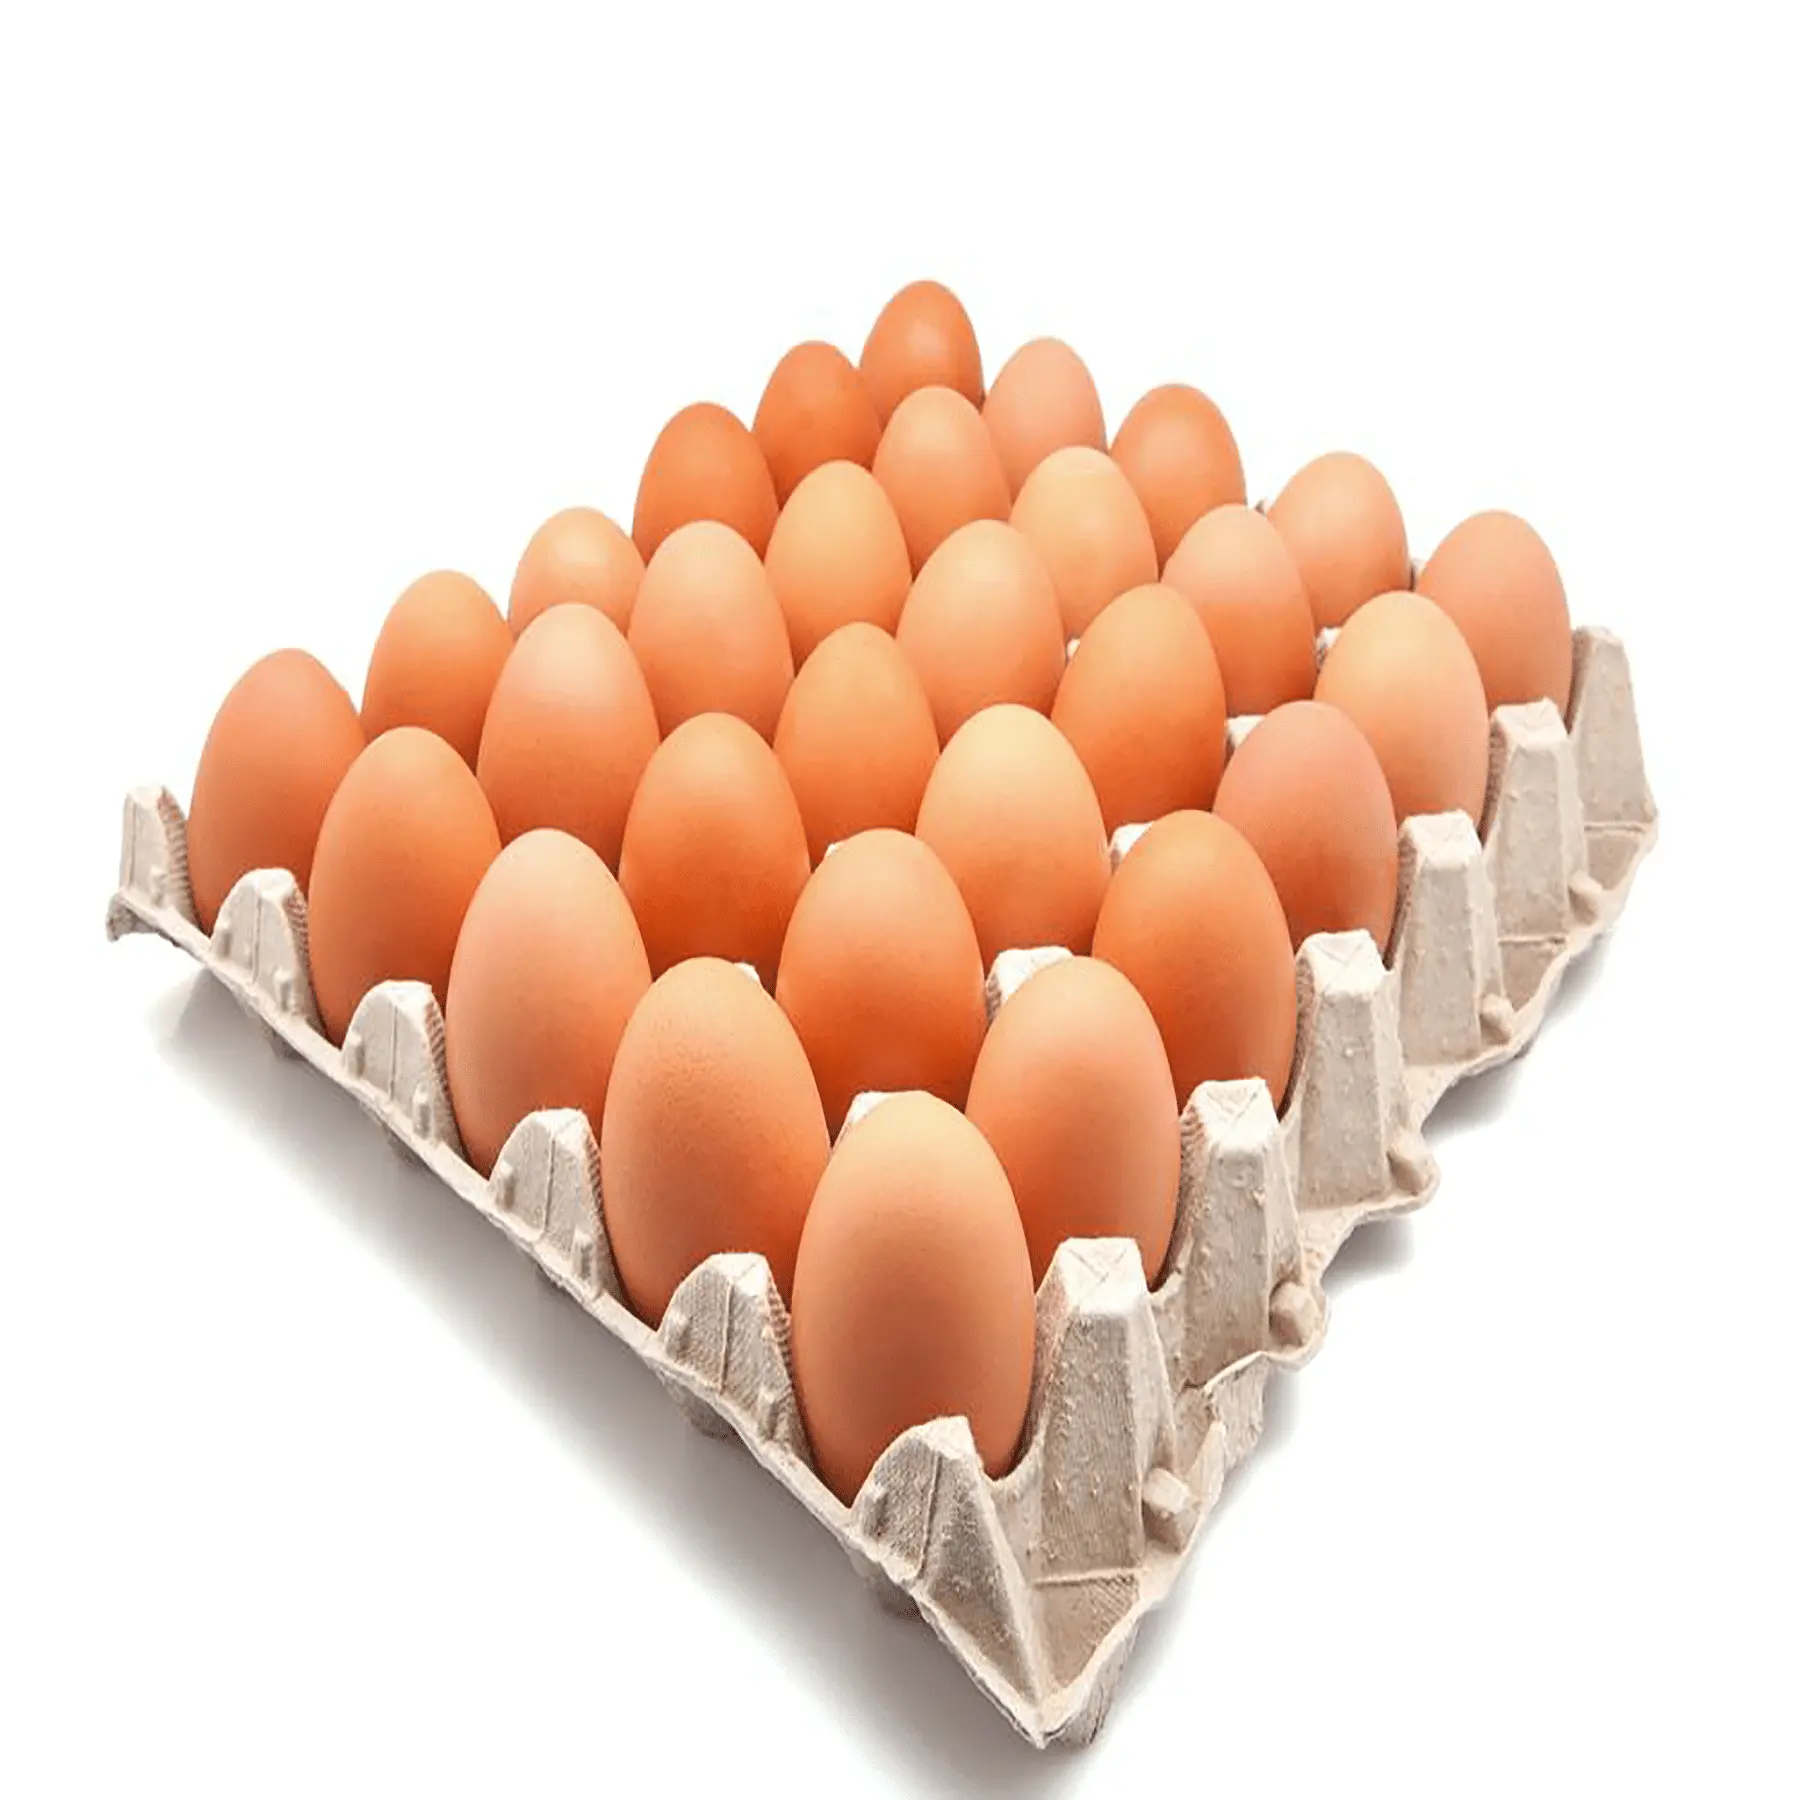 Fresh Chicken Eggs / Round Table Eggs for Sale / fertile hatching eggs Farm Fresh Chicken Eggs Offer Free Sample